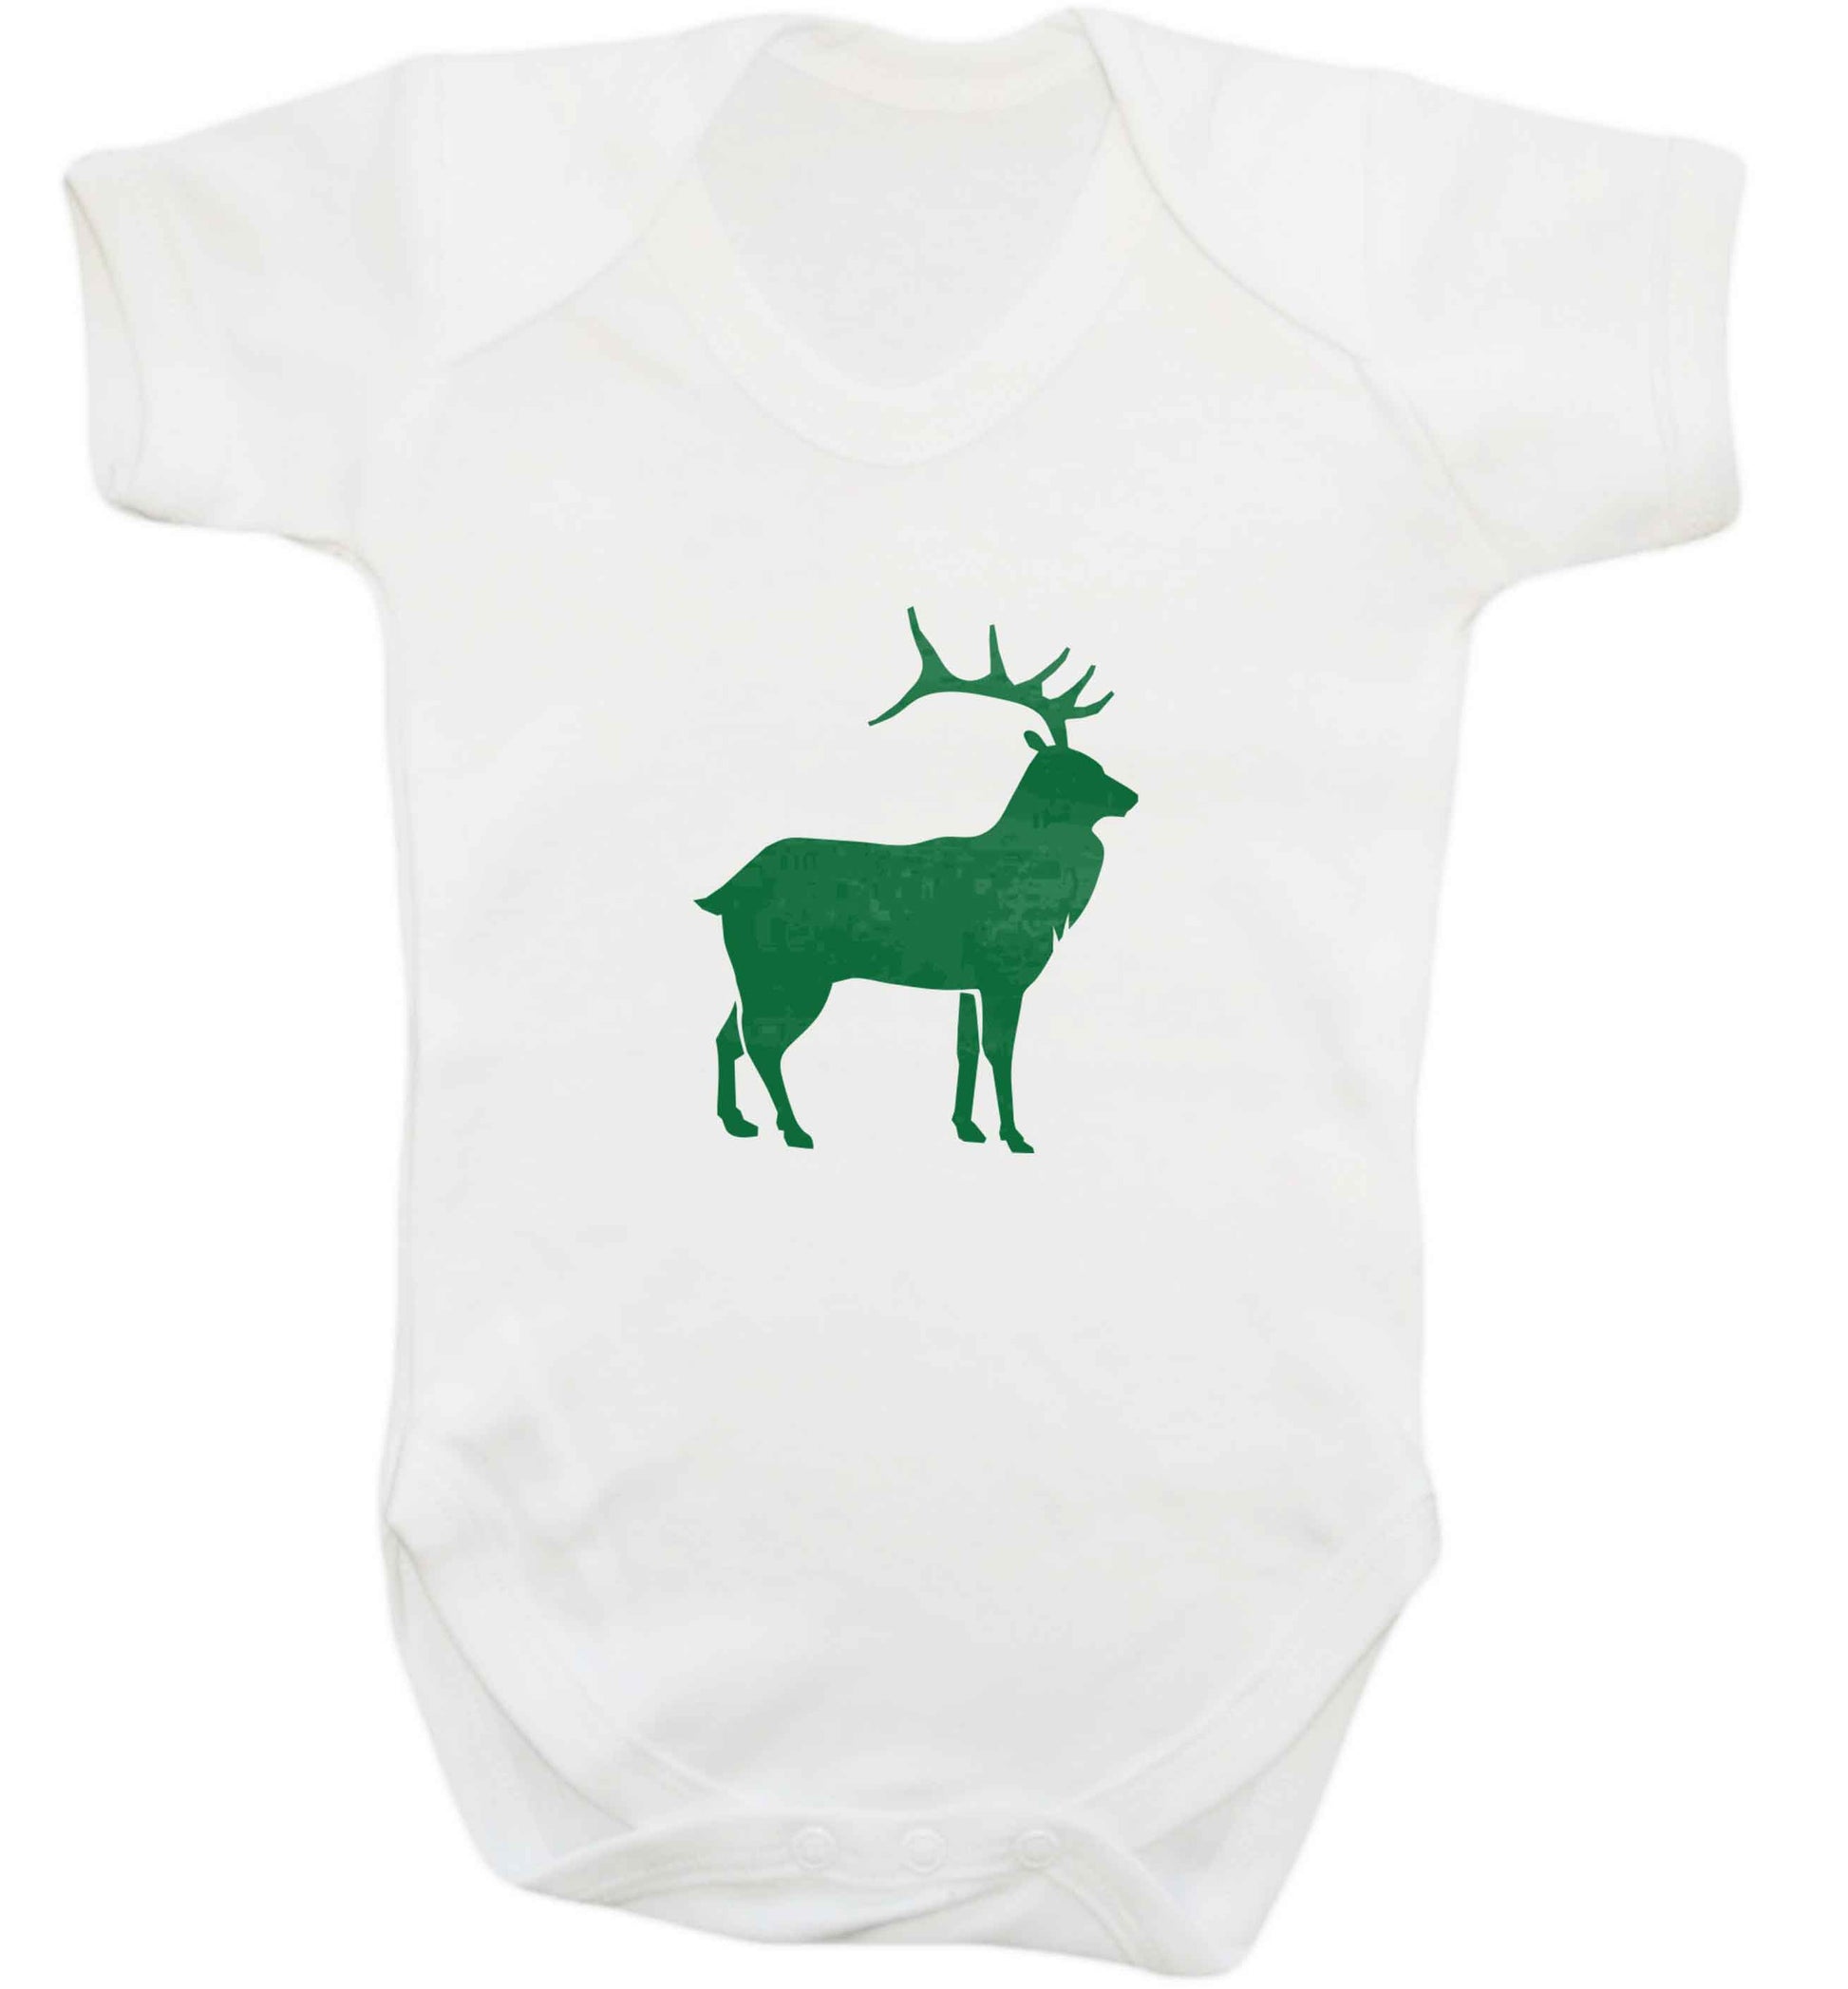 Green stag baby vest white 18-24 months